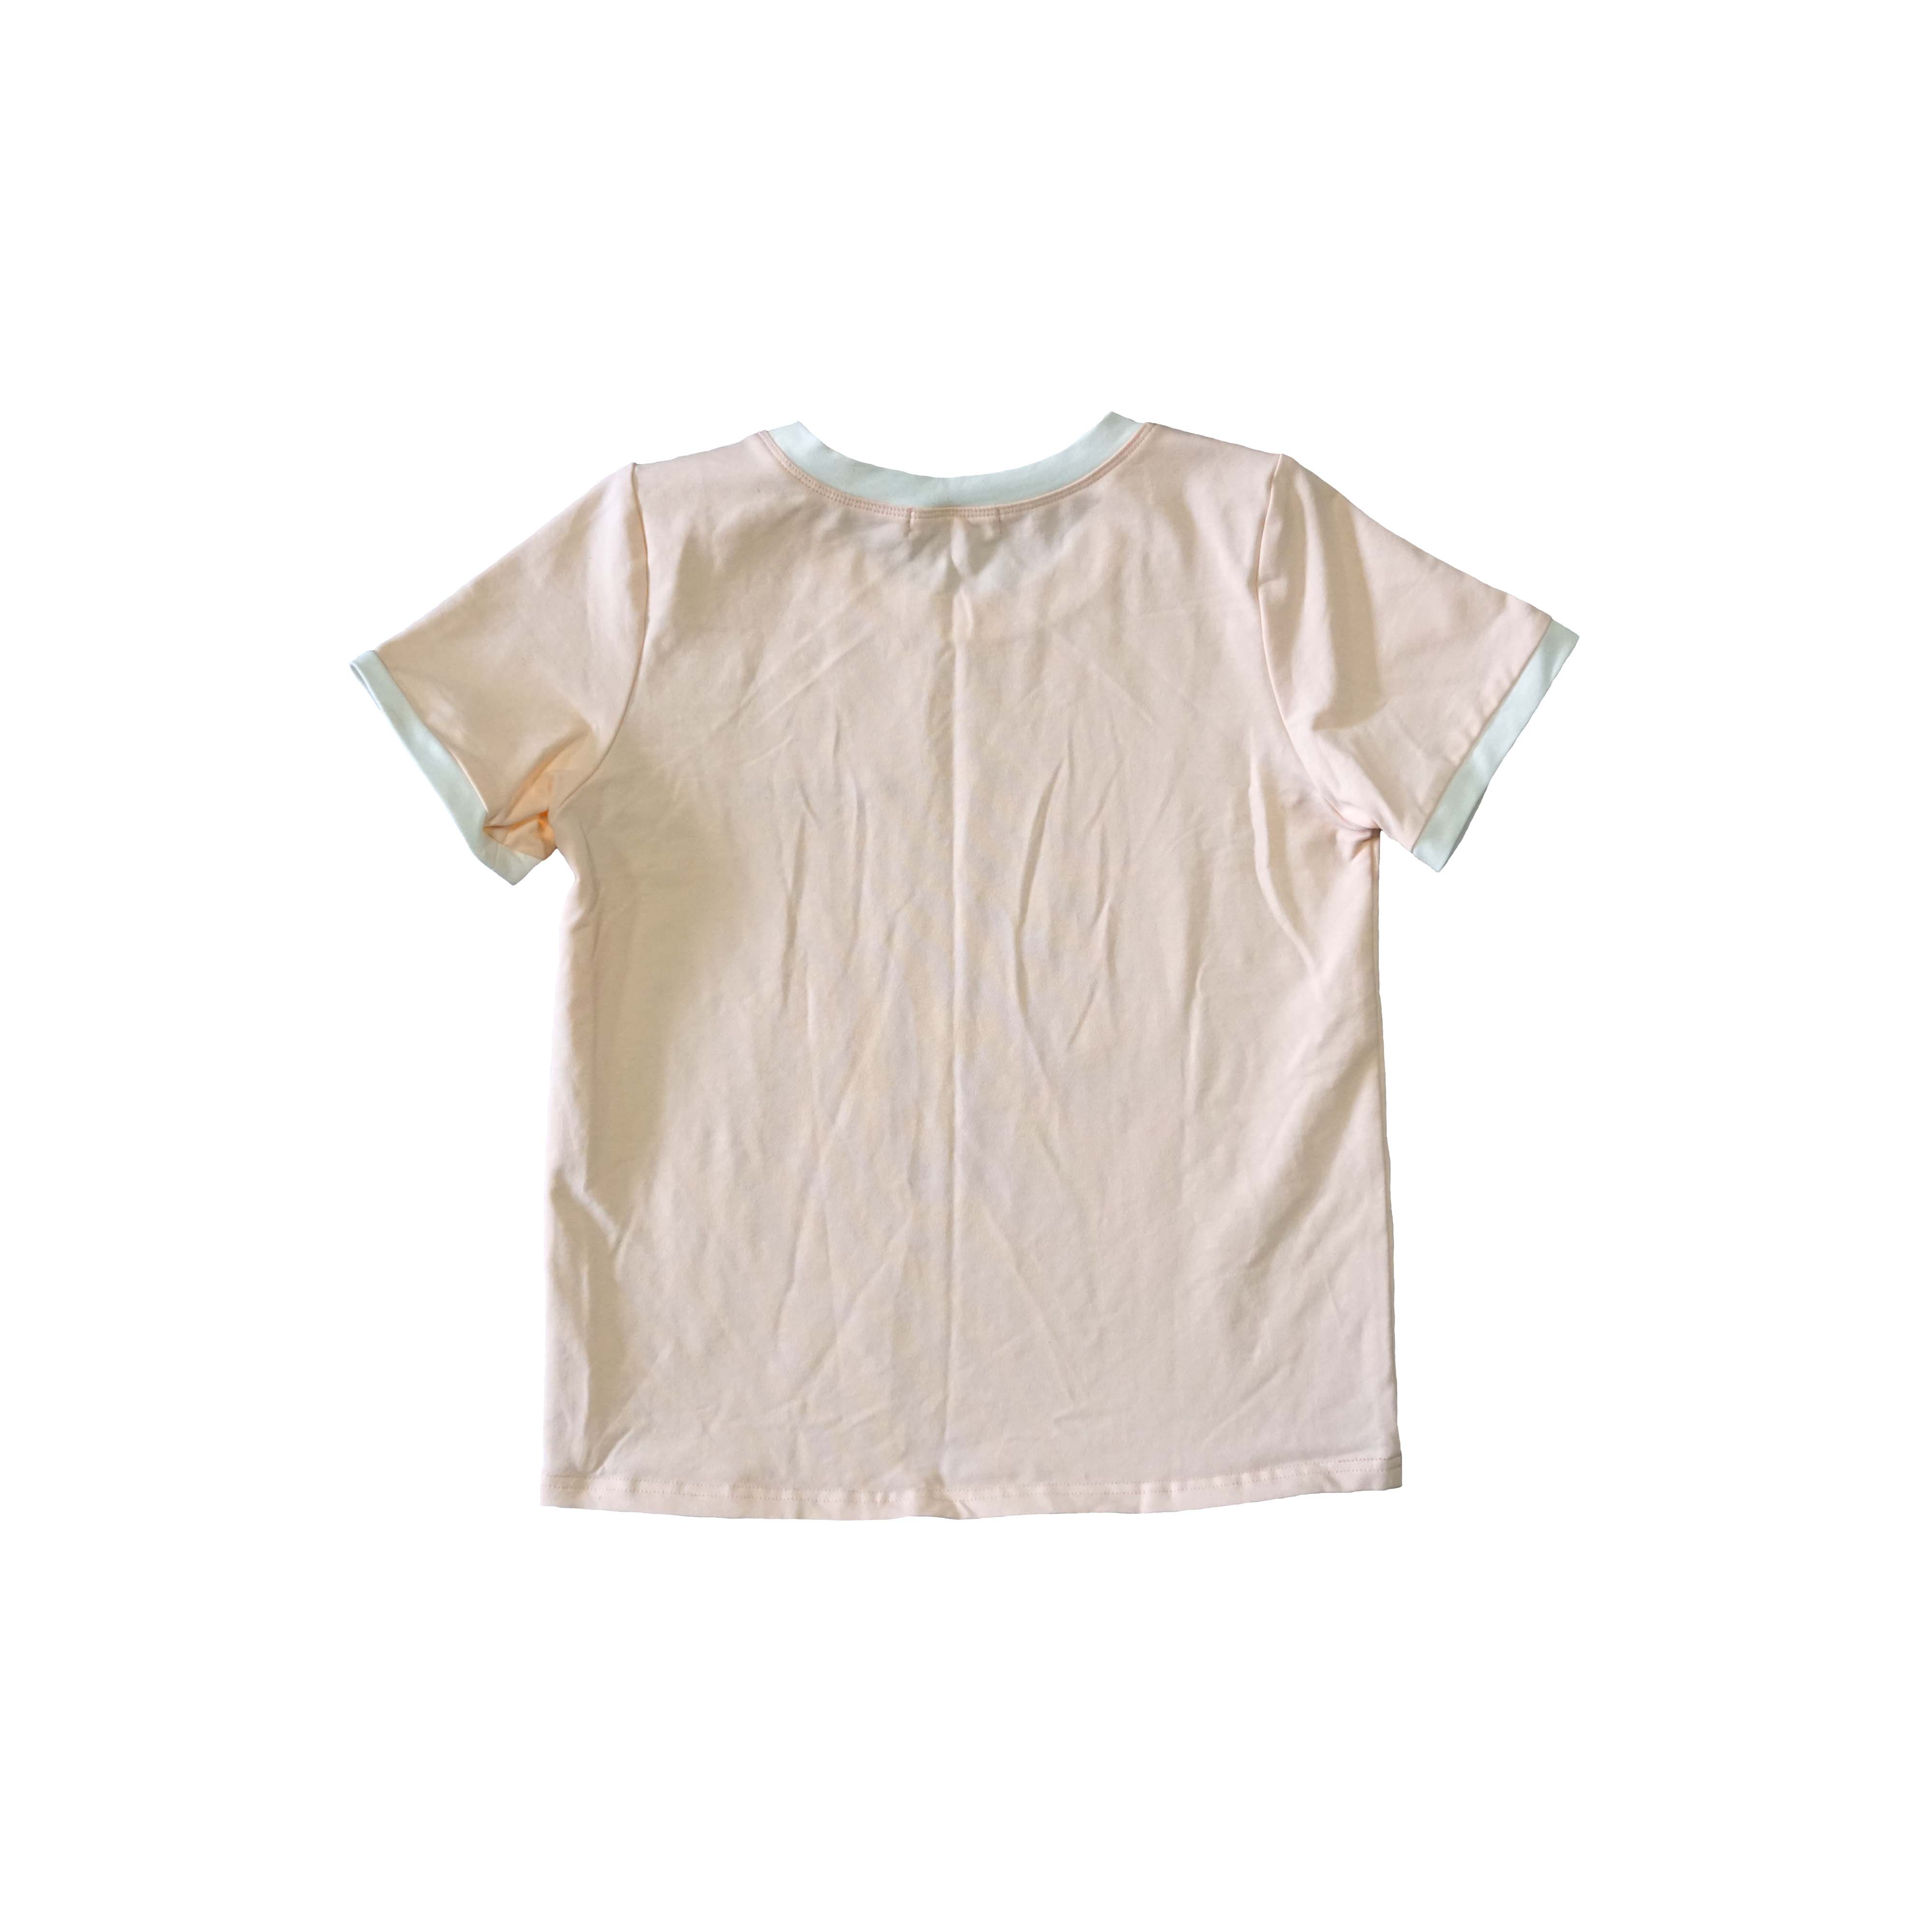 Embroideried pink children's T-shirt